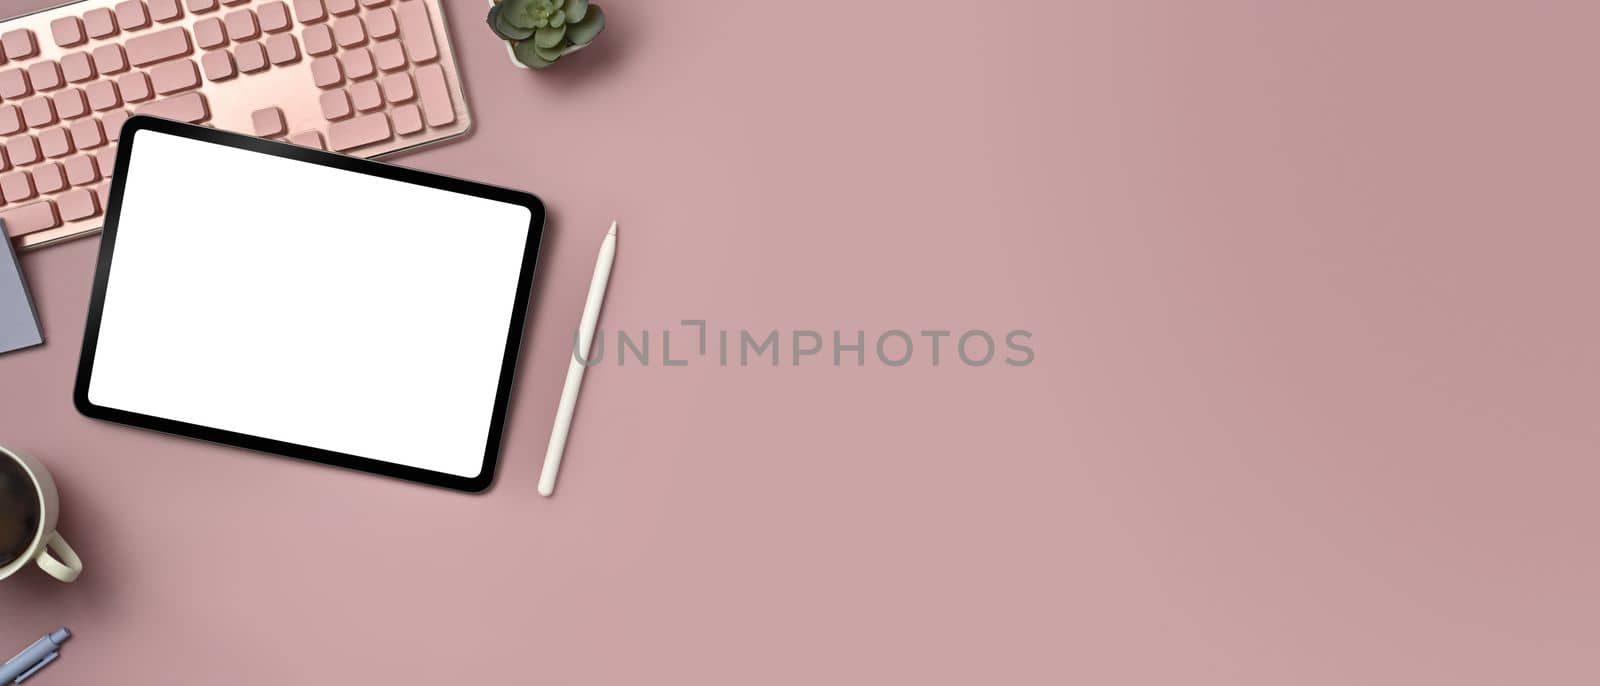 Digital tablet, keyboard, coffee cup and potted plant on pink background. Copy space for text information or content.